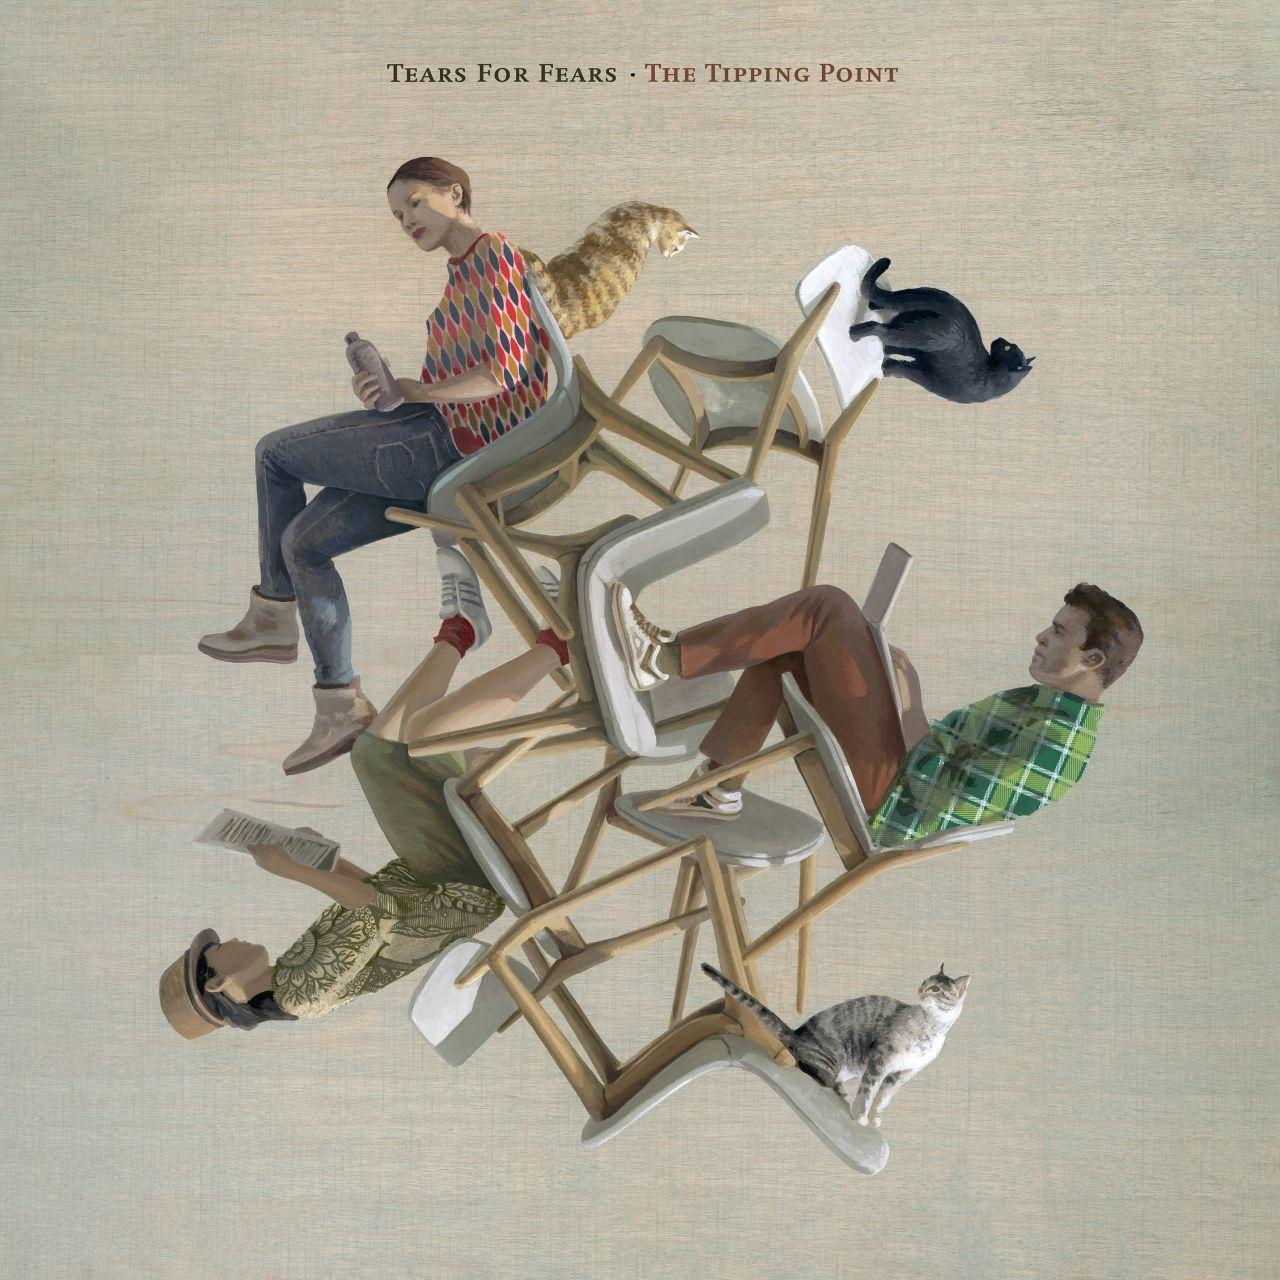 Tipping - For - Tears (CD) The Point Fears